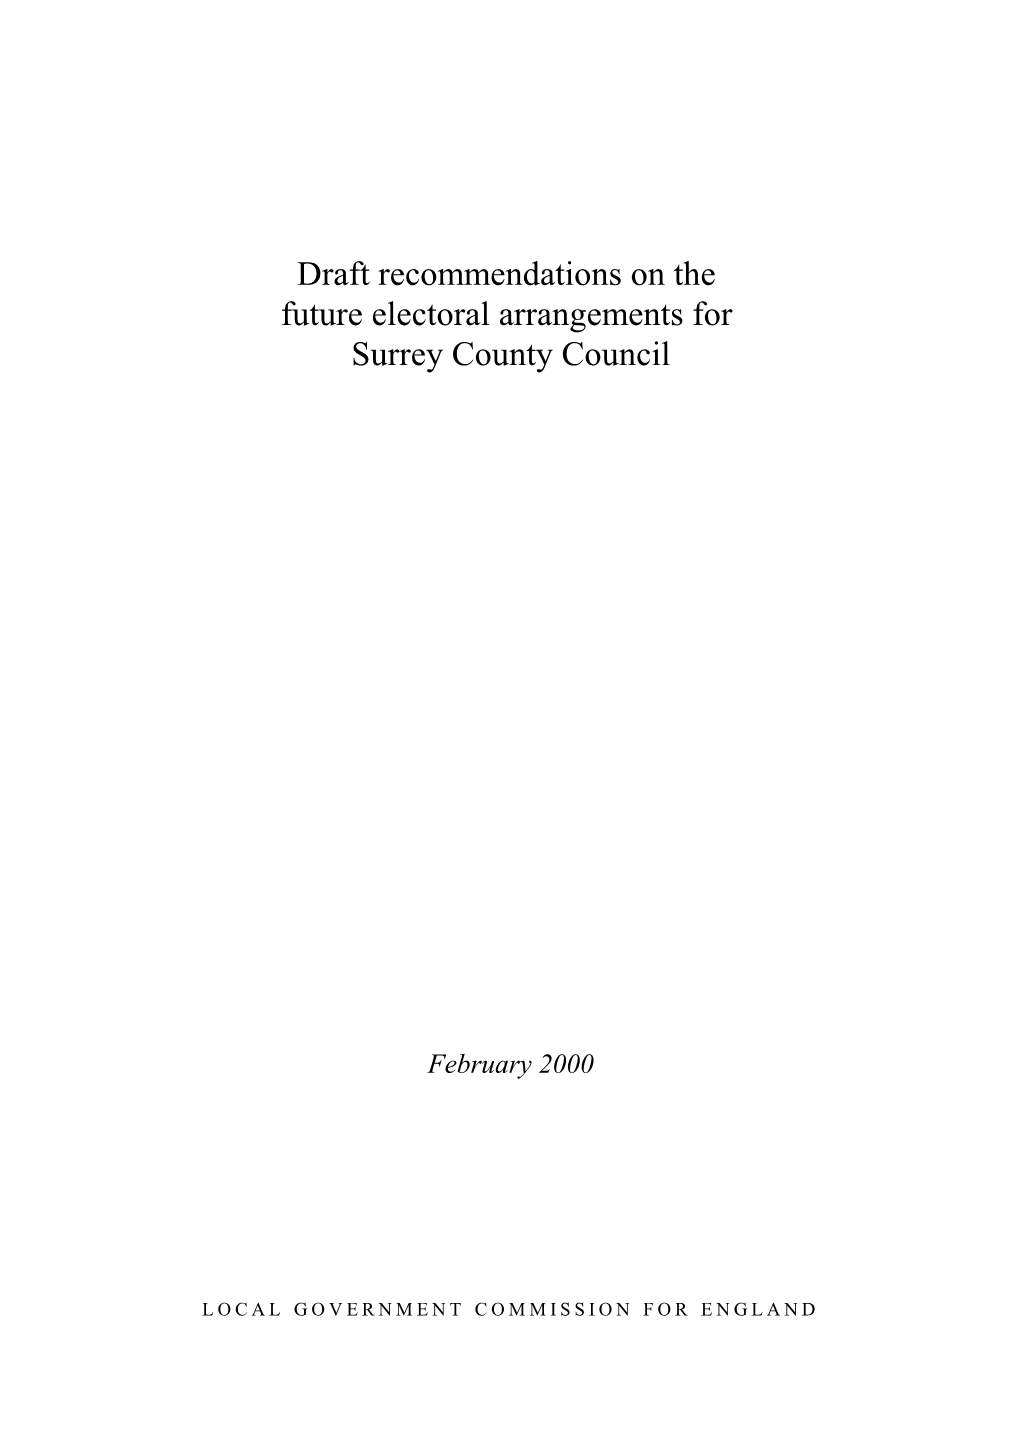 Draft Recommendations on the Future Electoral Arrangements for Surrey County Council